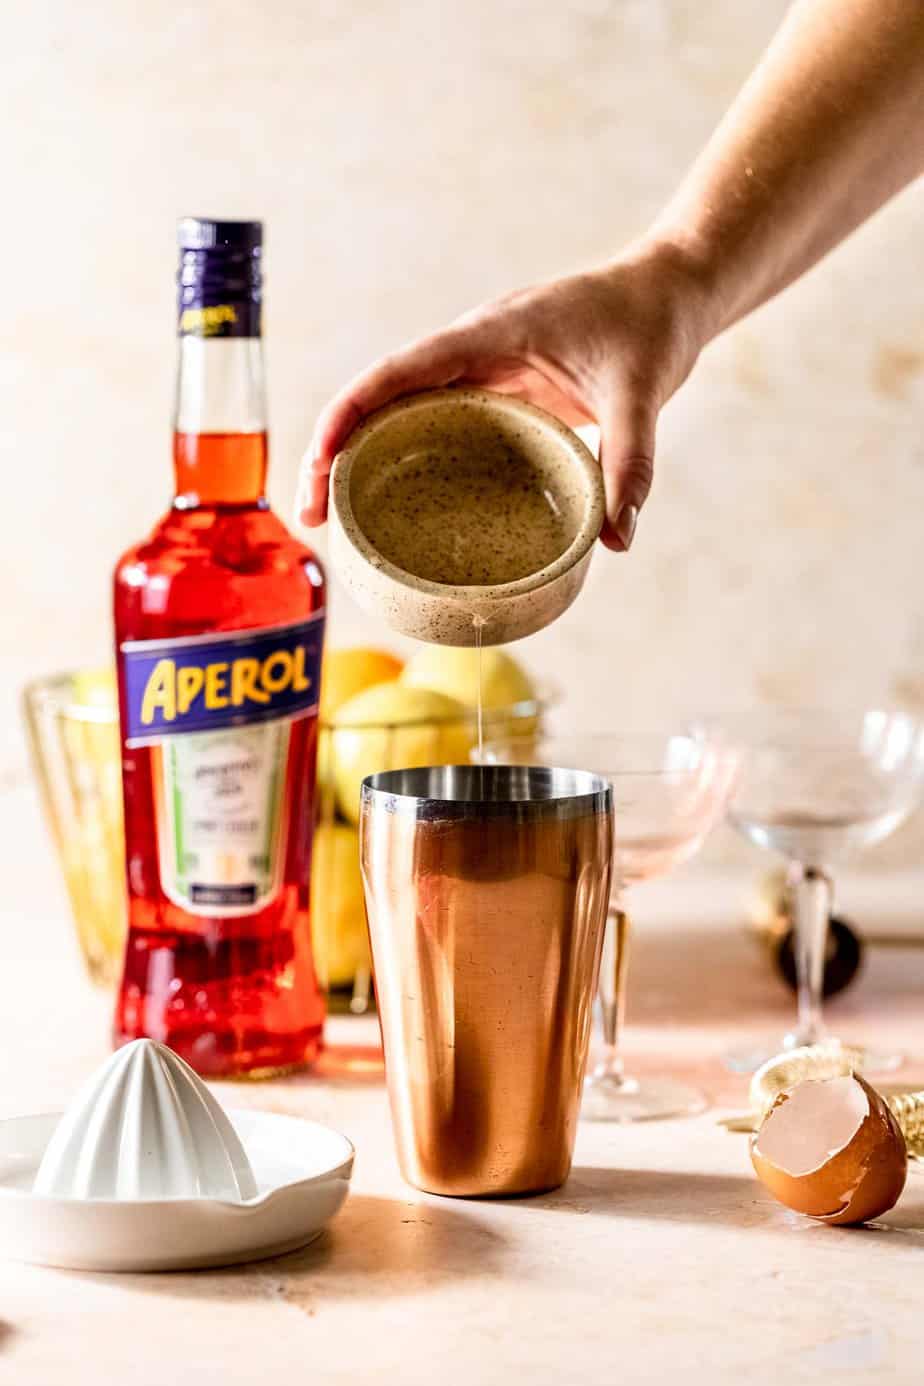 A cocktail being made with a bottle of Aperol